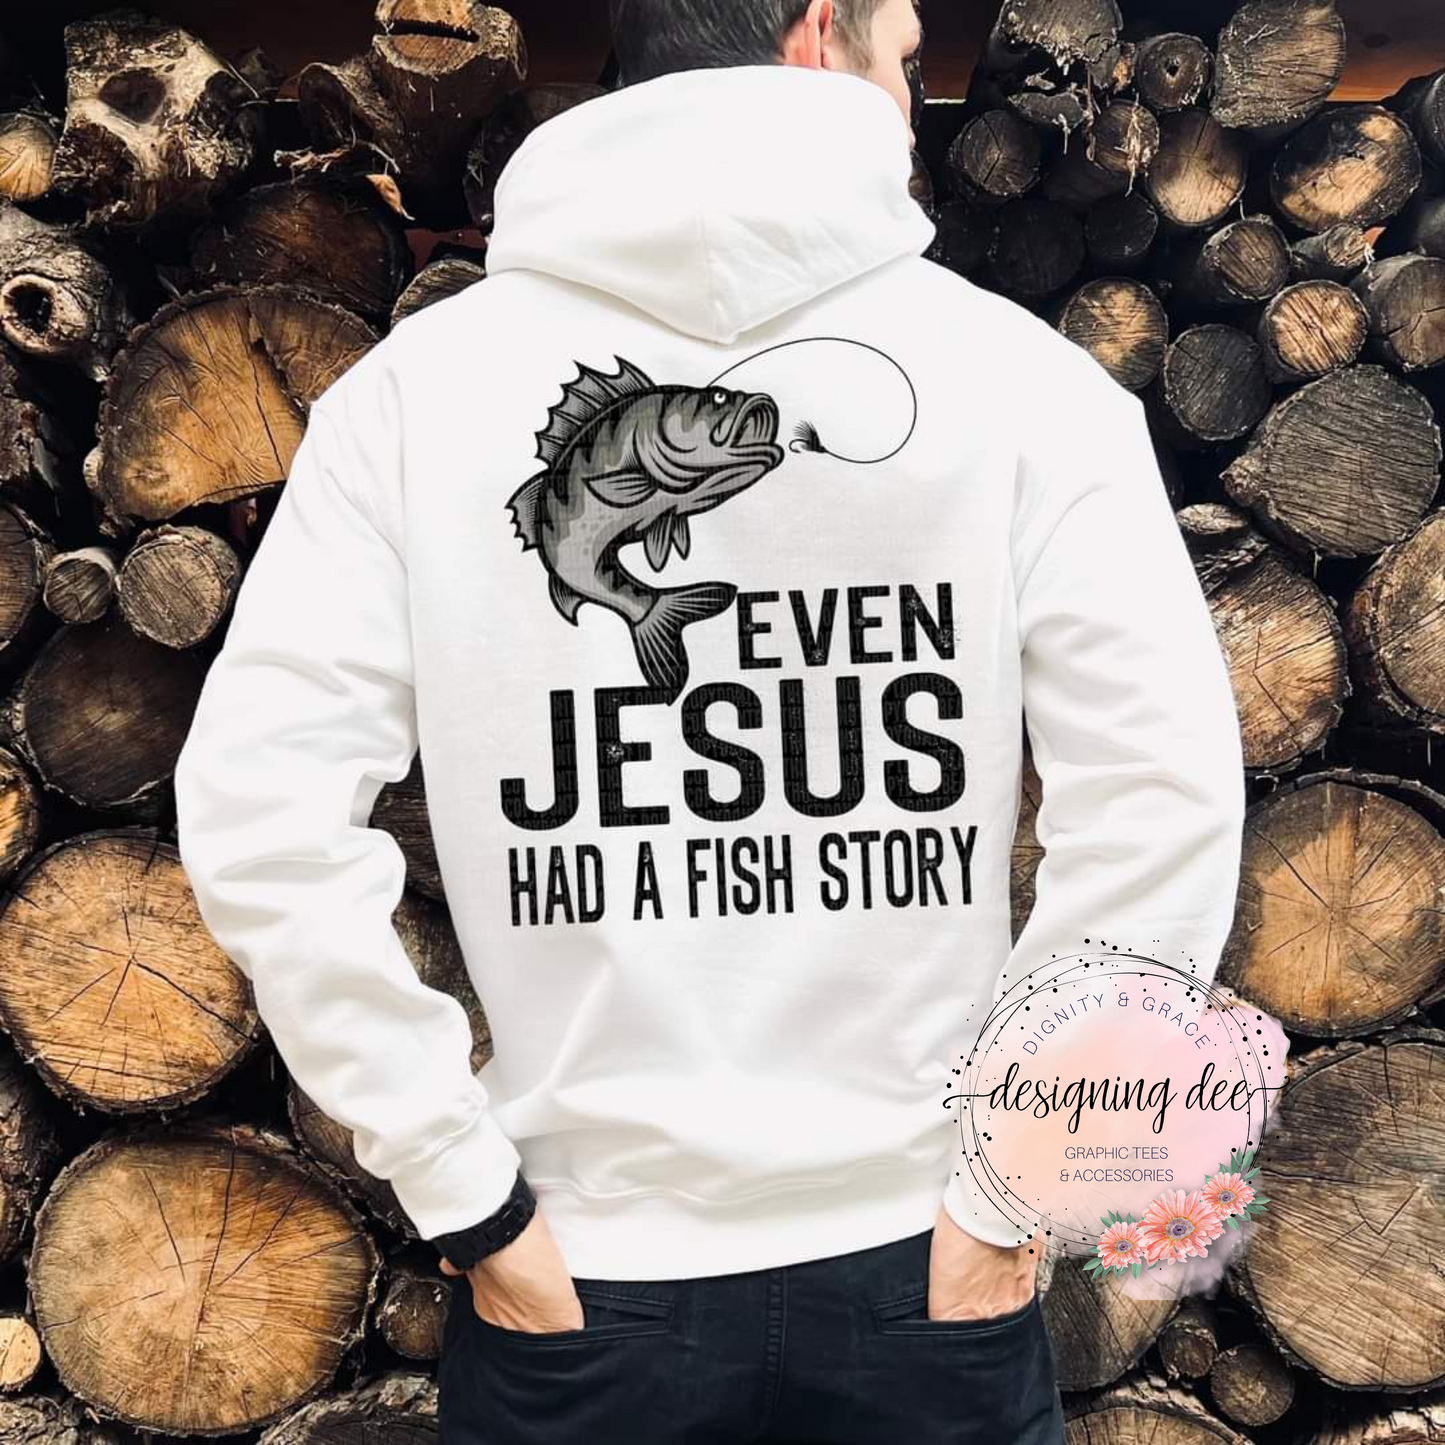 Even Jesus Had A Fish Story Christian Shirt for Men